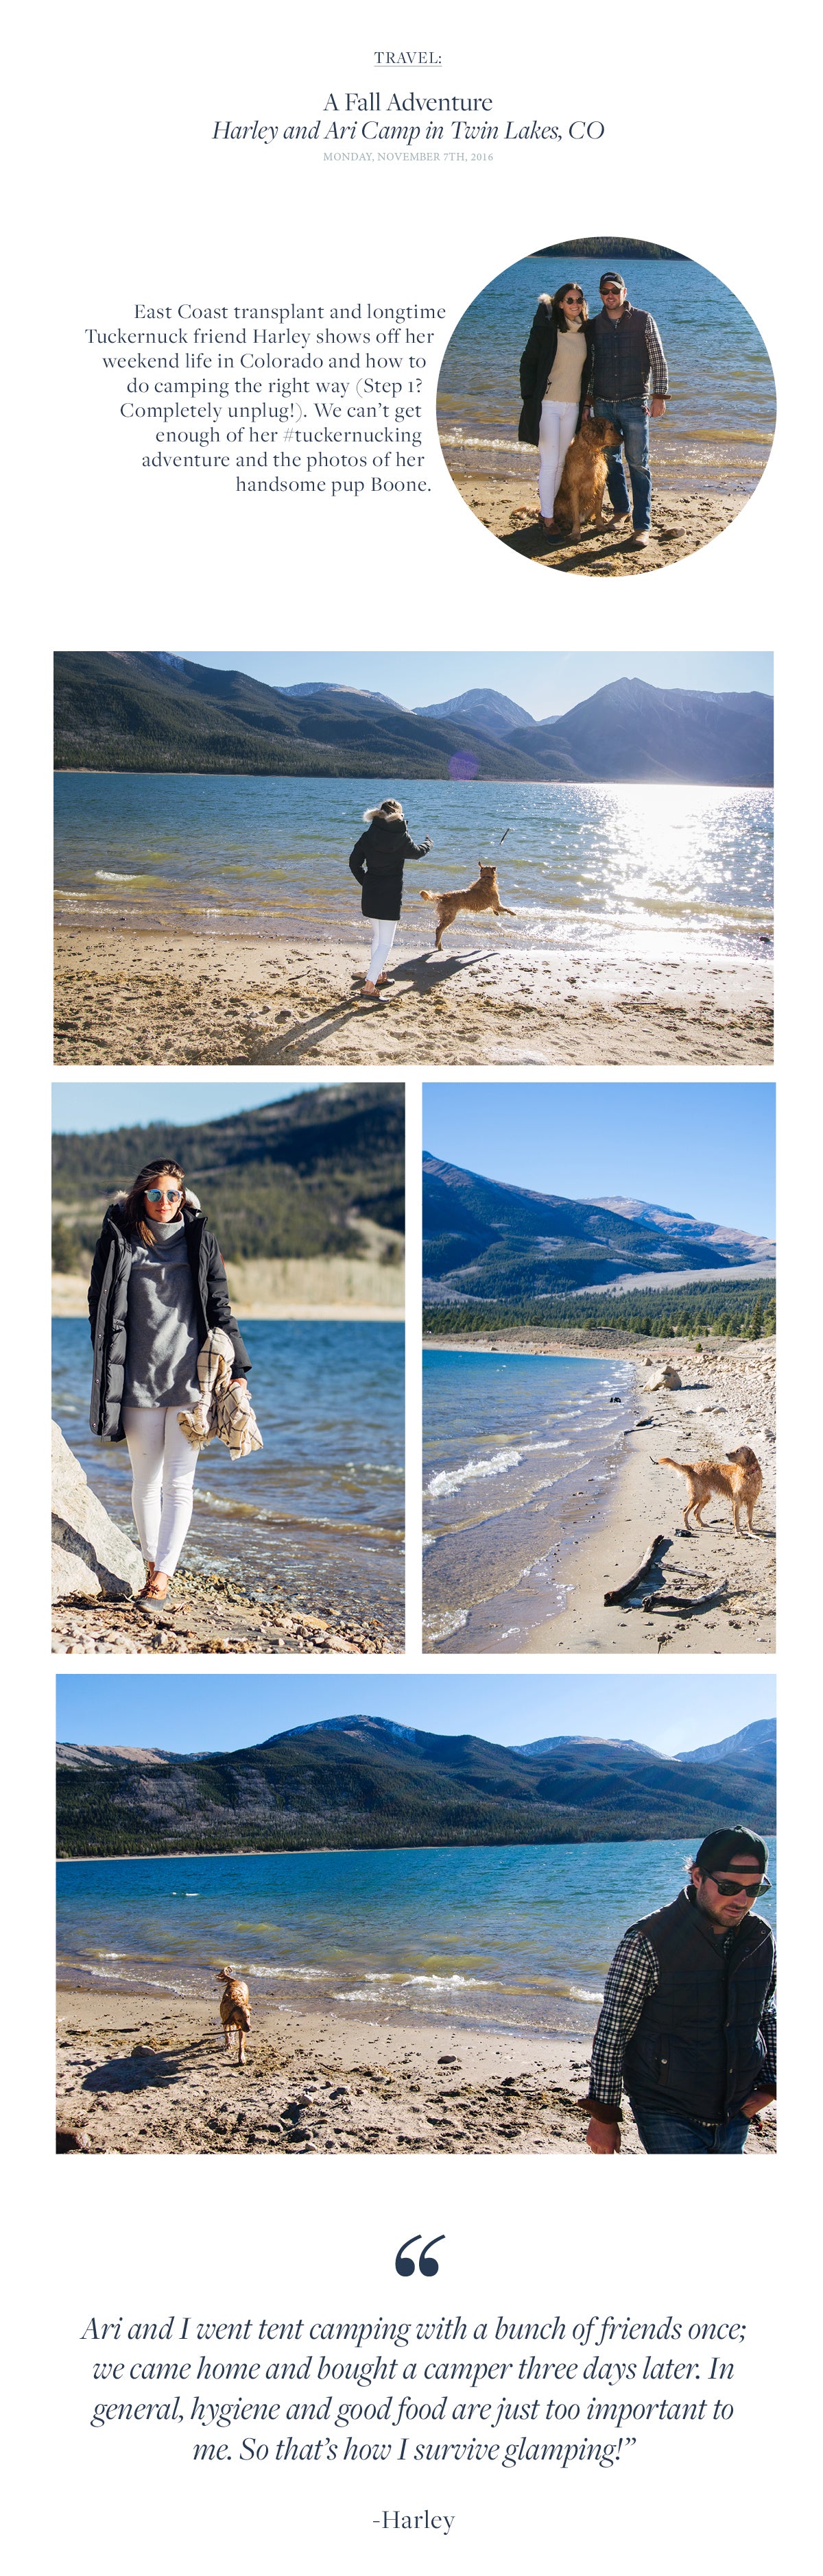 East Coast transplant and longtime  Tuckernuck friend Harley shows off her weekend life in Colorado and how to do camping the right way (Step 1?  Completely unplug!). We can’t get enough of her #tuckernucking  adventure and the photos of her  handsome pup Boone.